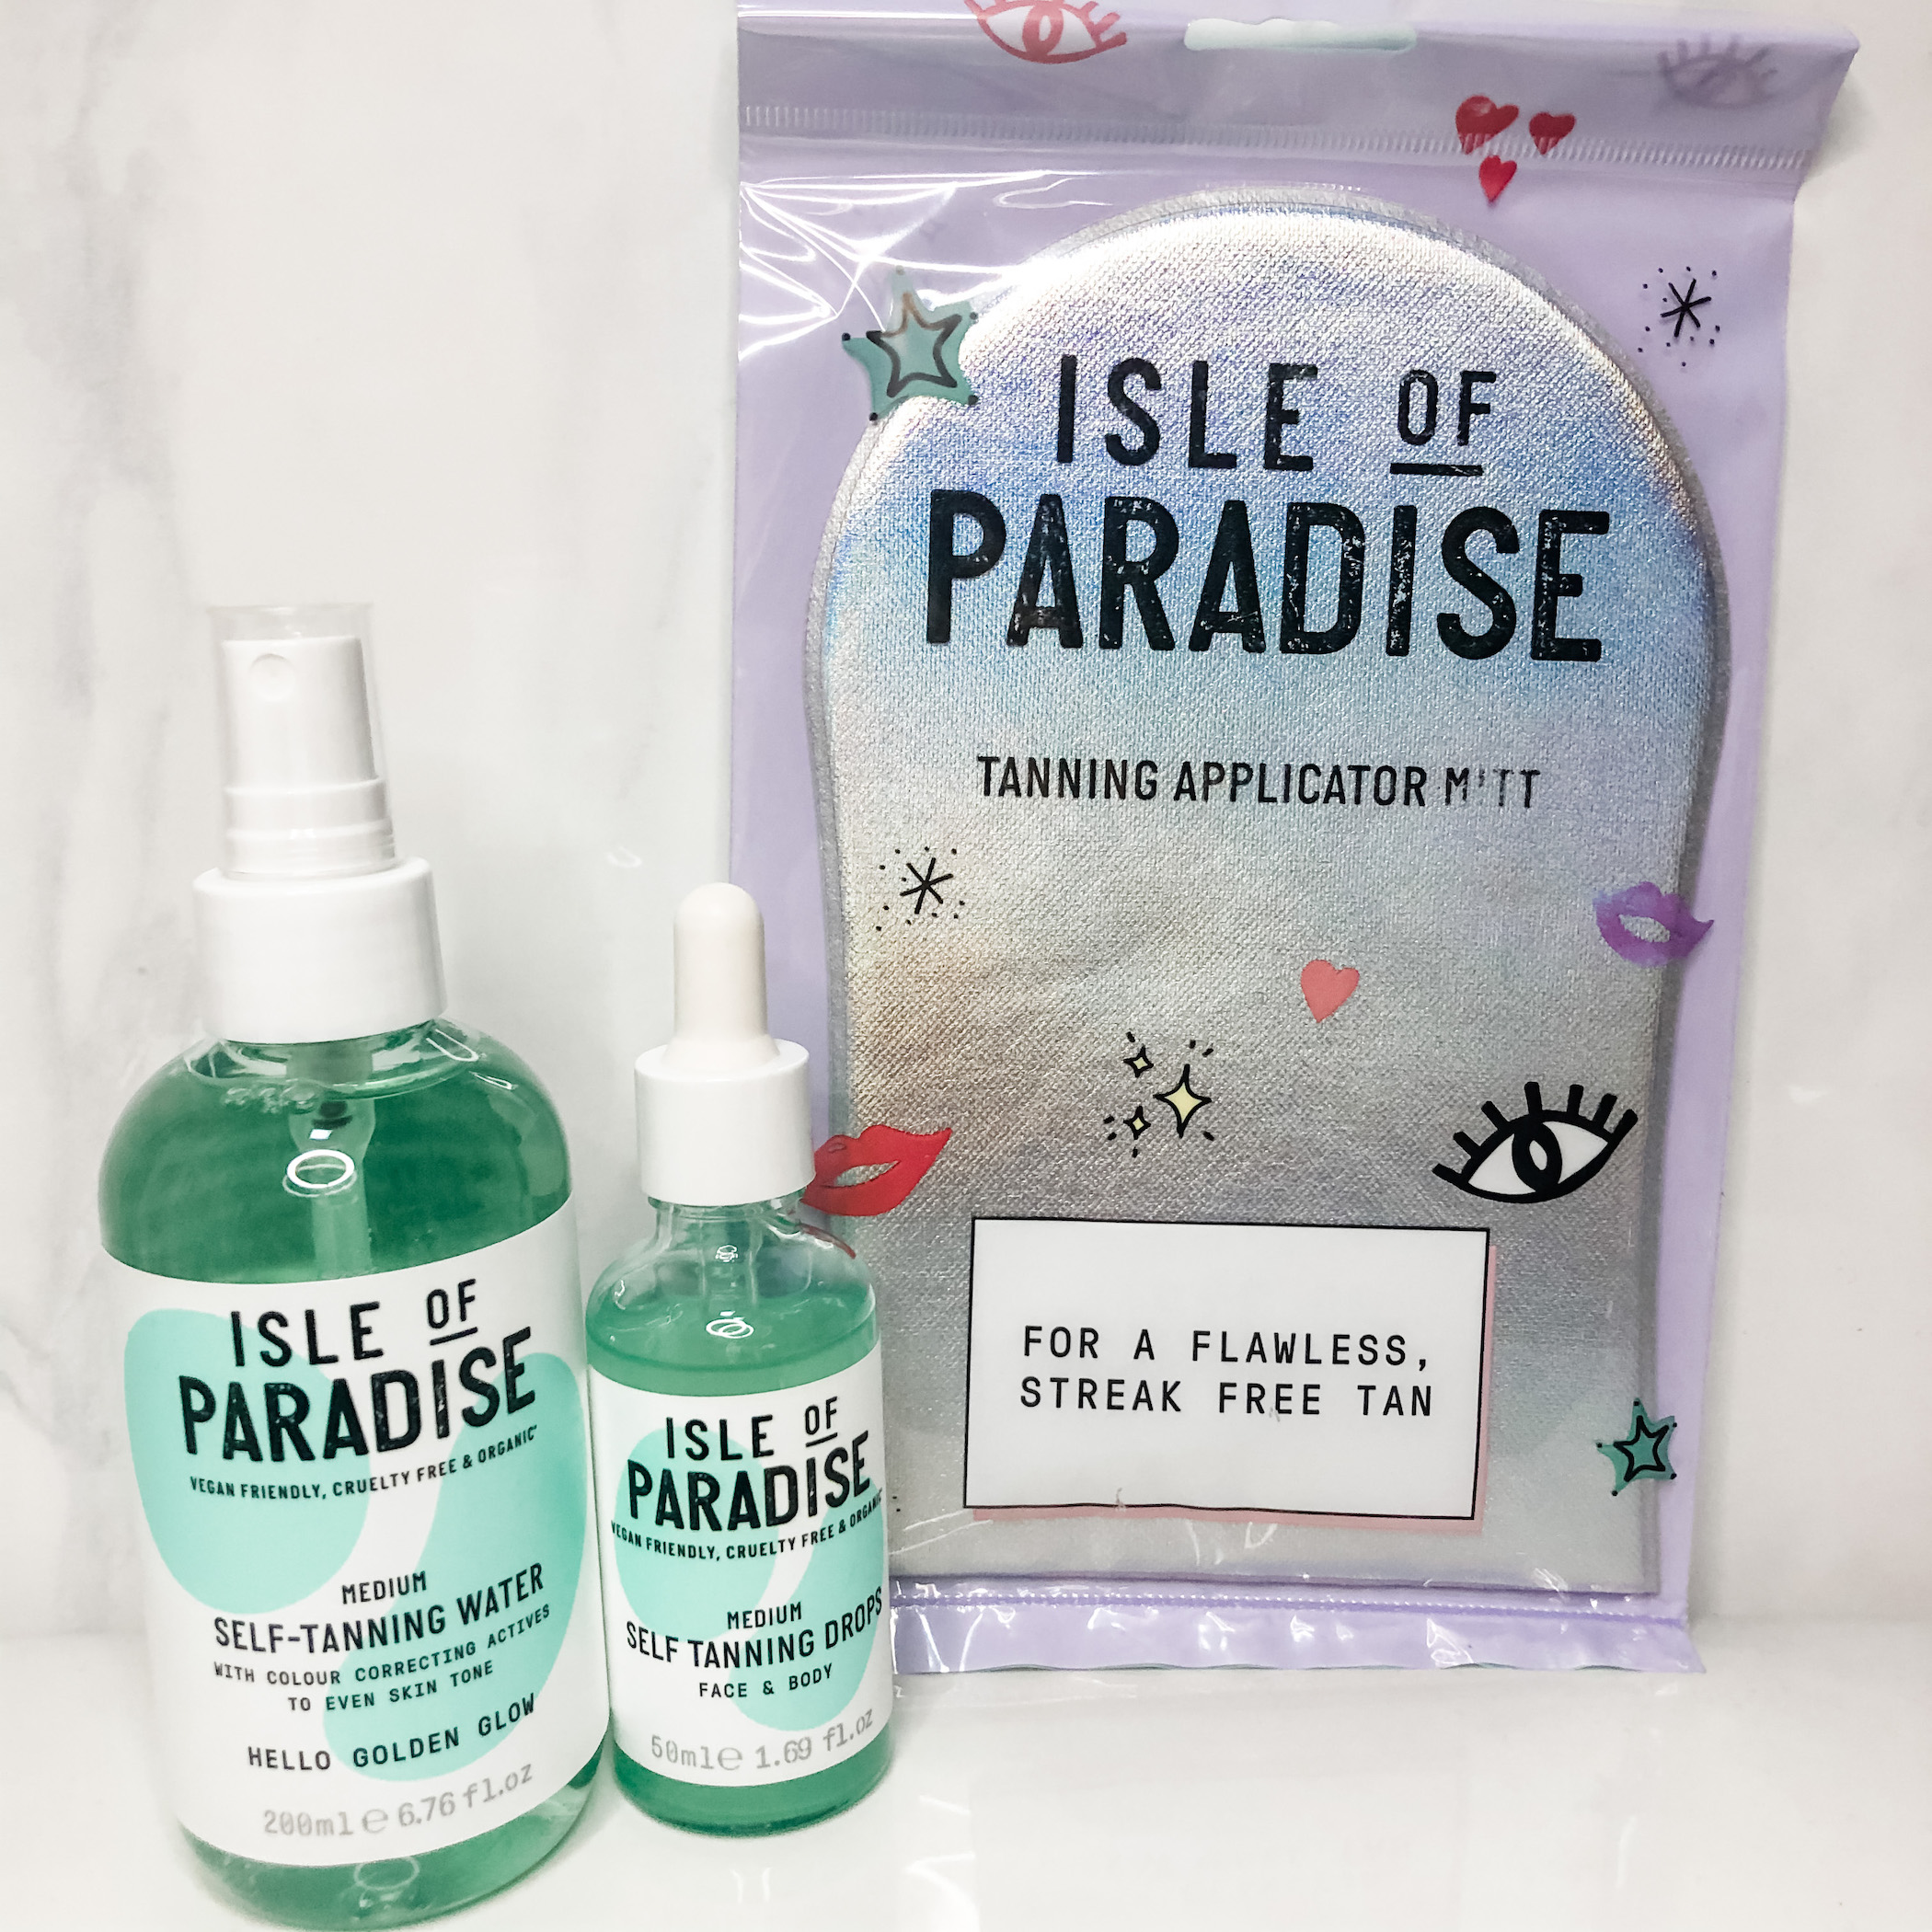 ISLE OF PARADISE TANNING DROPS REVIEW  ISLE OF PARADISE REVIEW AND  OVERNIGHT BEFORE + AFTER! 